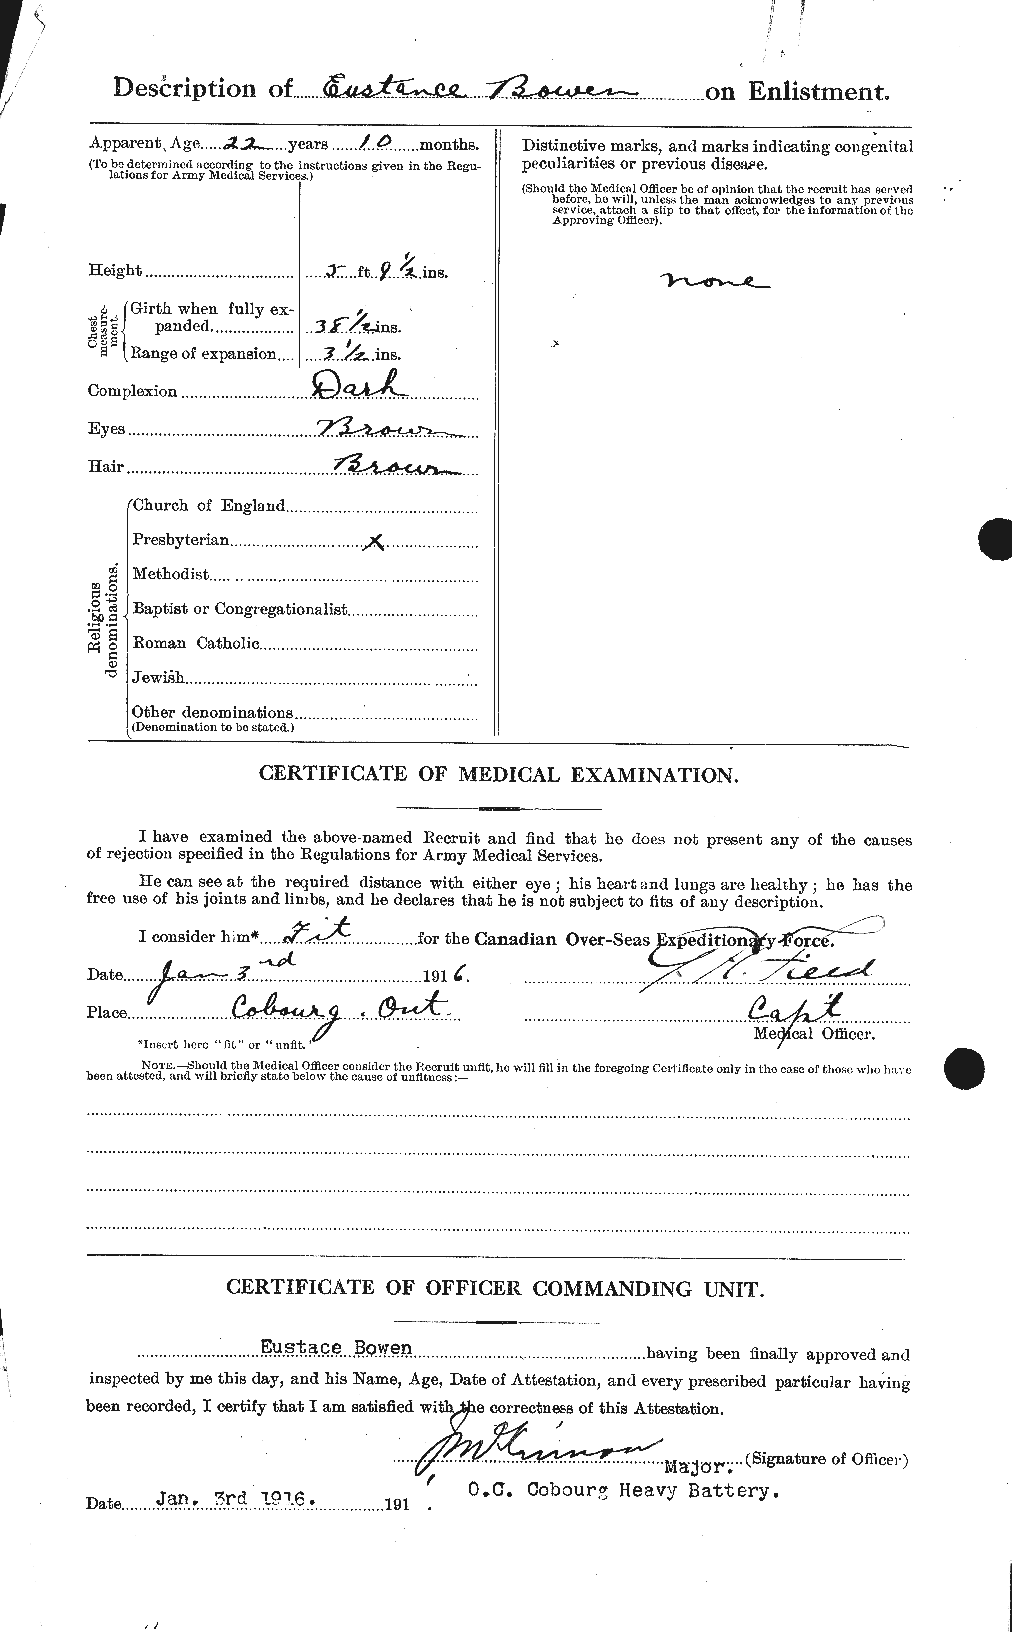 Personnel Records of the First World War - CEF 255385b